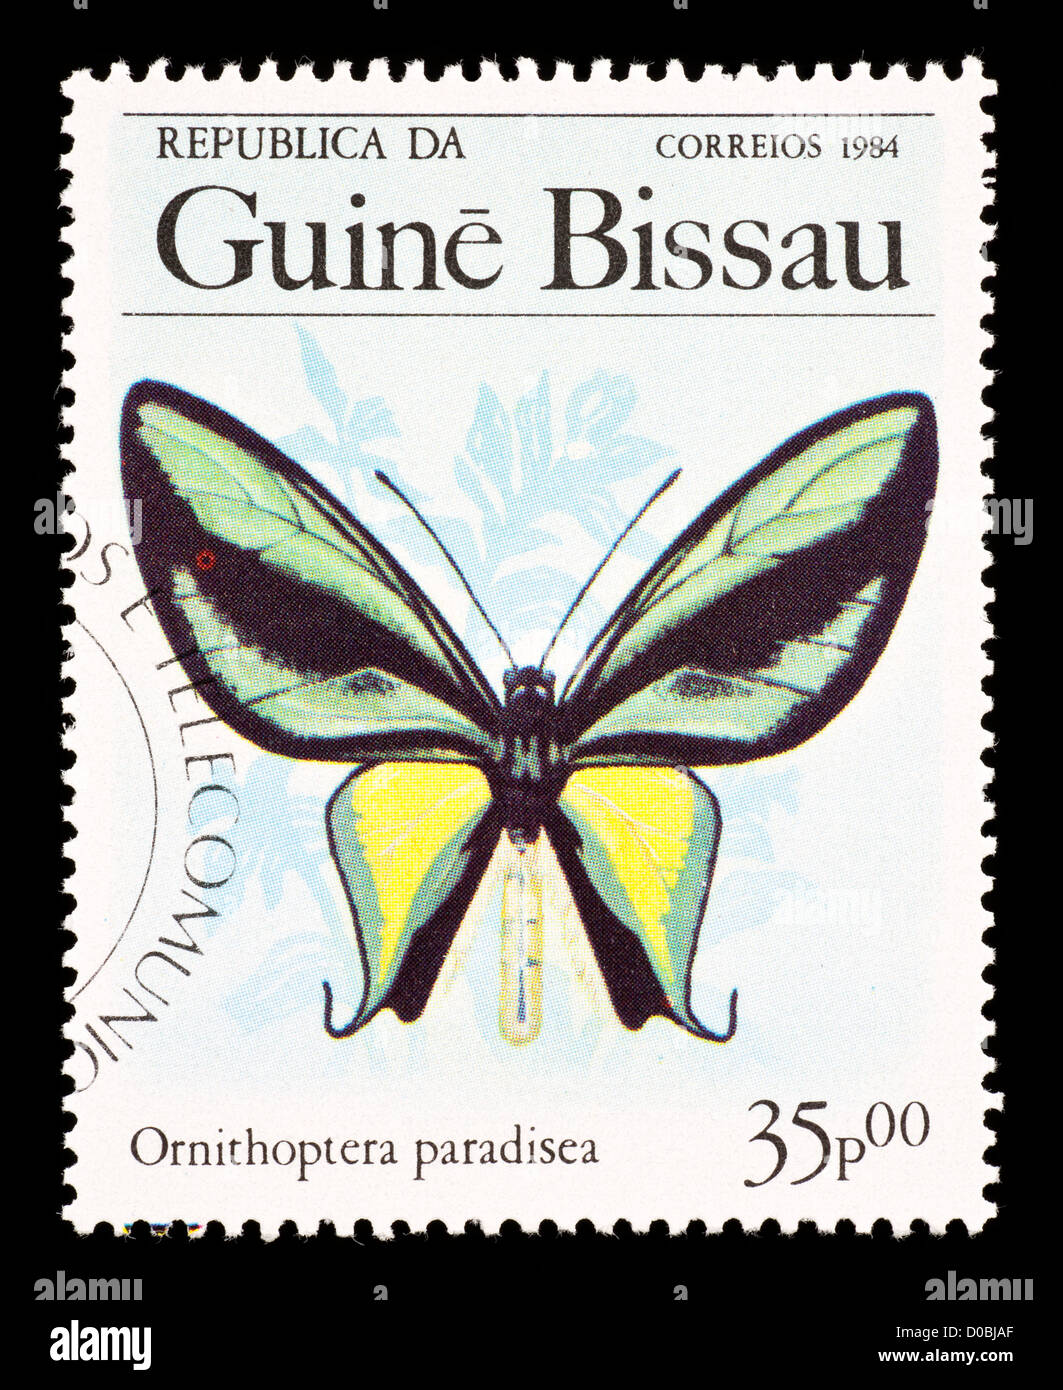 1966 PAPUA NEW GUINEA Green Birdwing Butterfly Stamp - Retrographics